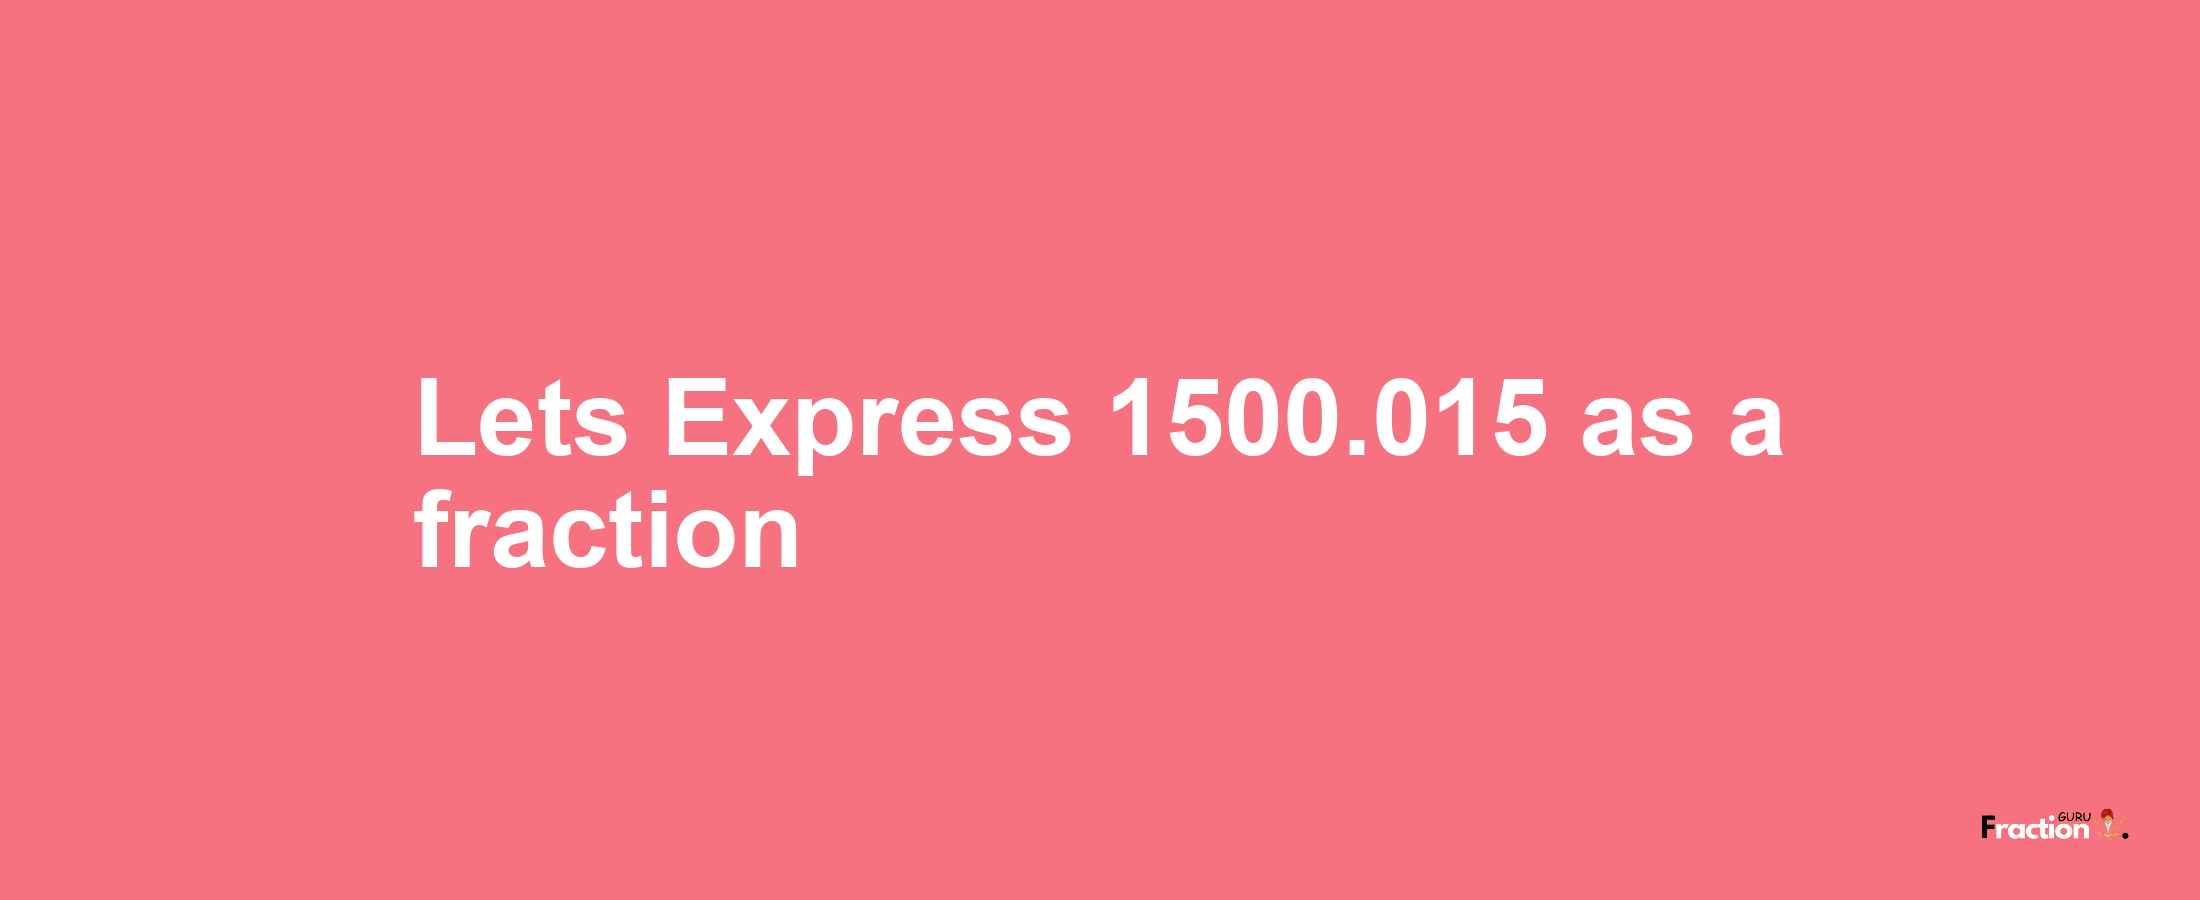 Lets Express 1500.015 as afraction